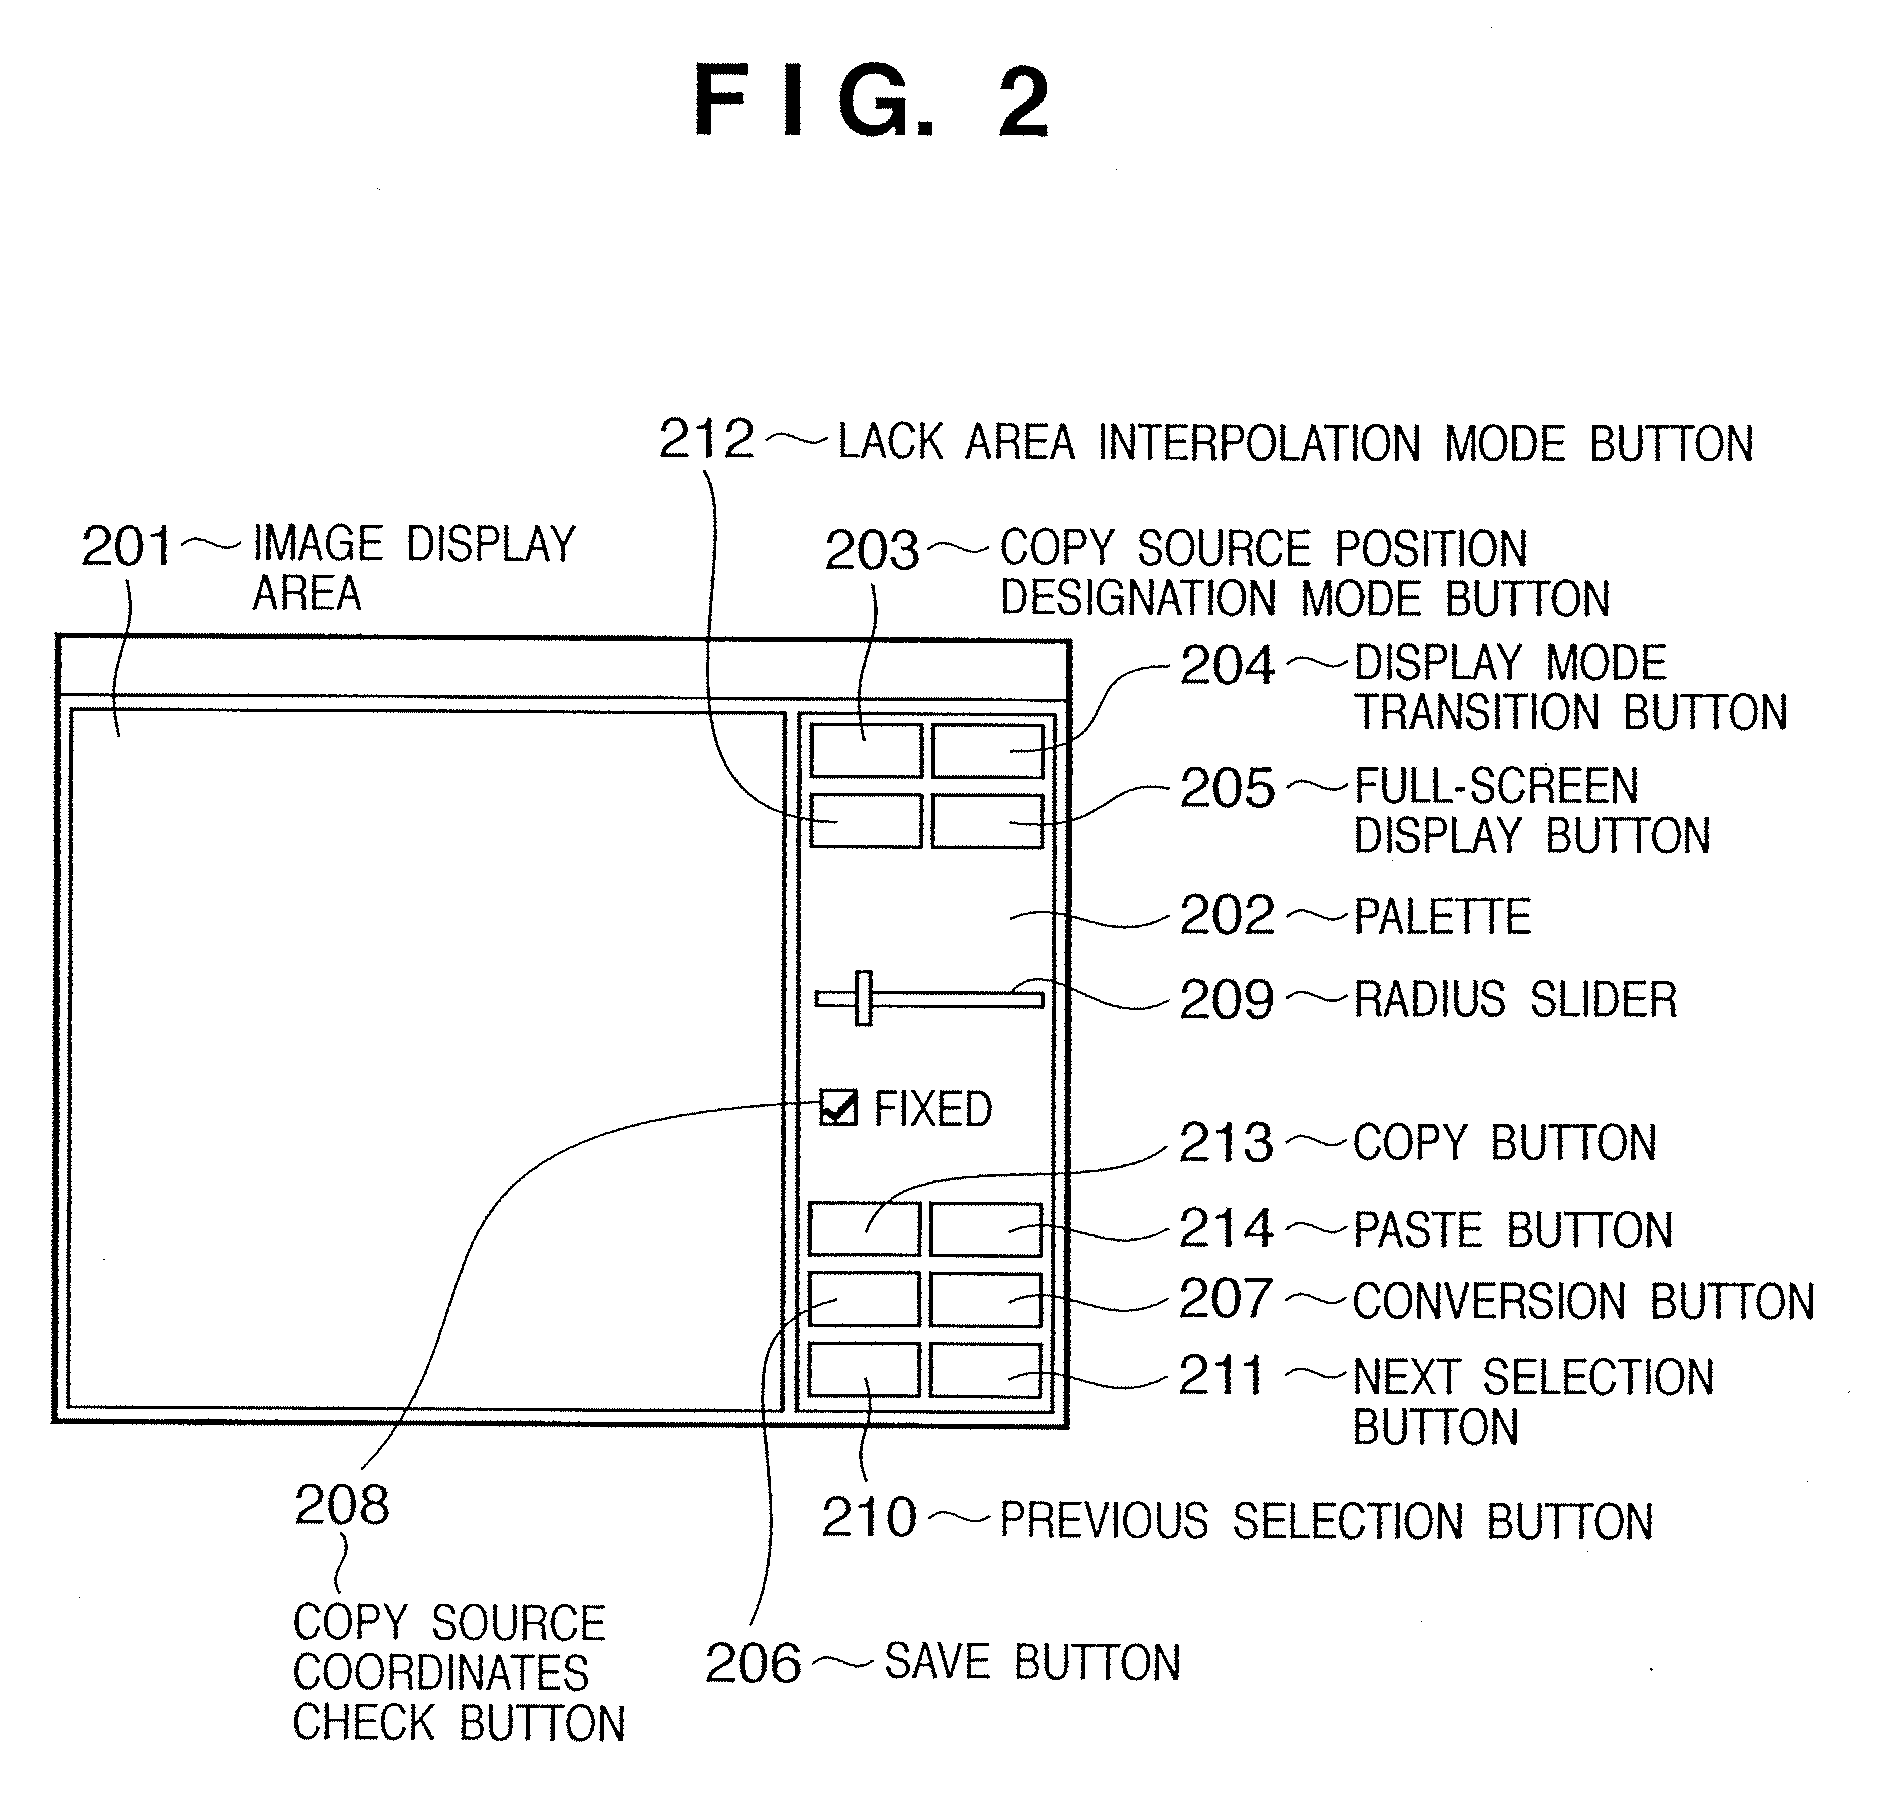 Image editing apparatus and control method for the same, computer program, storage media